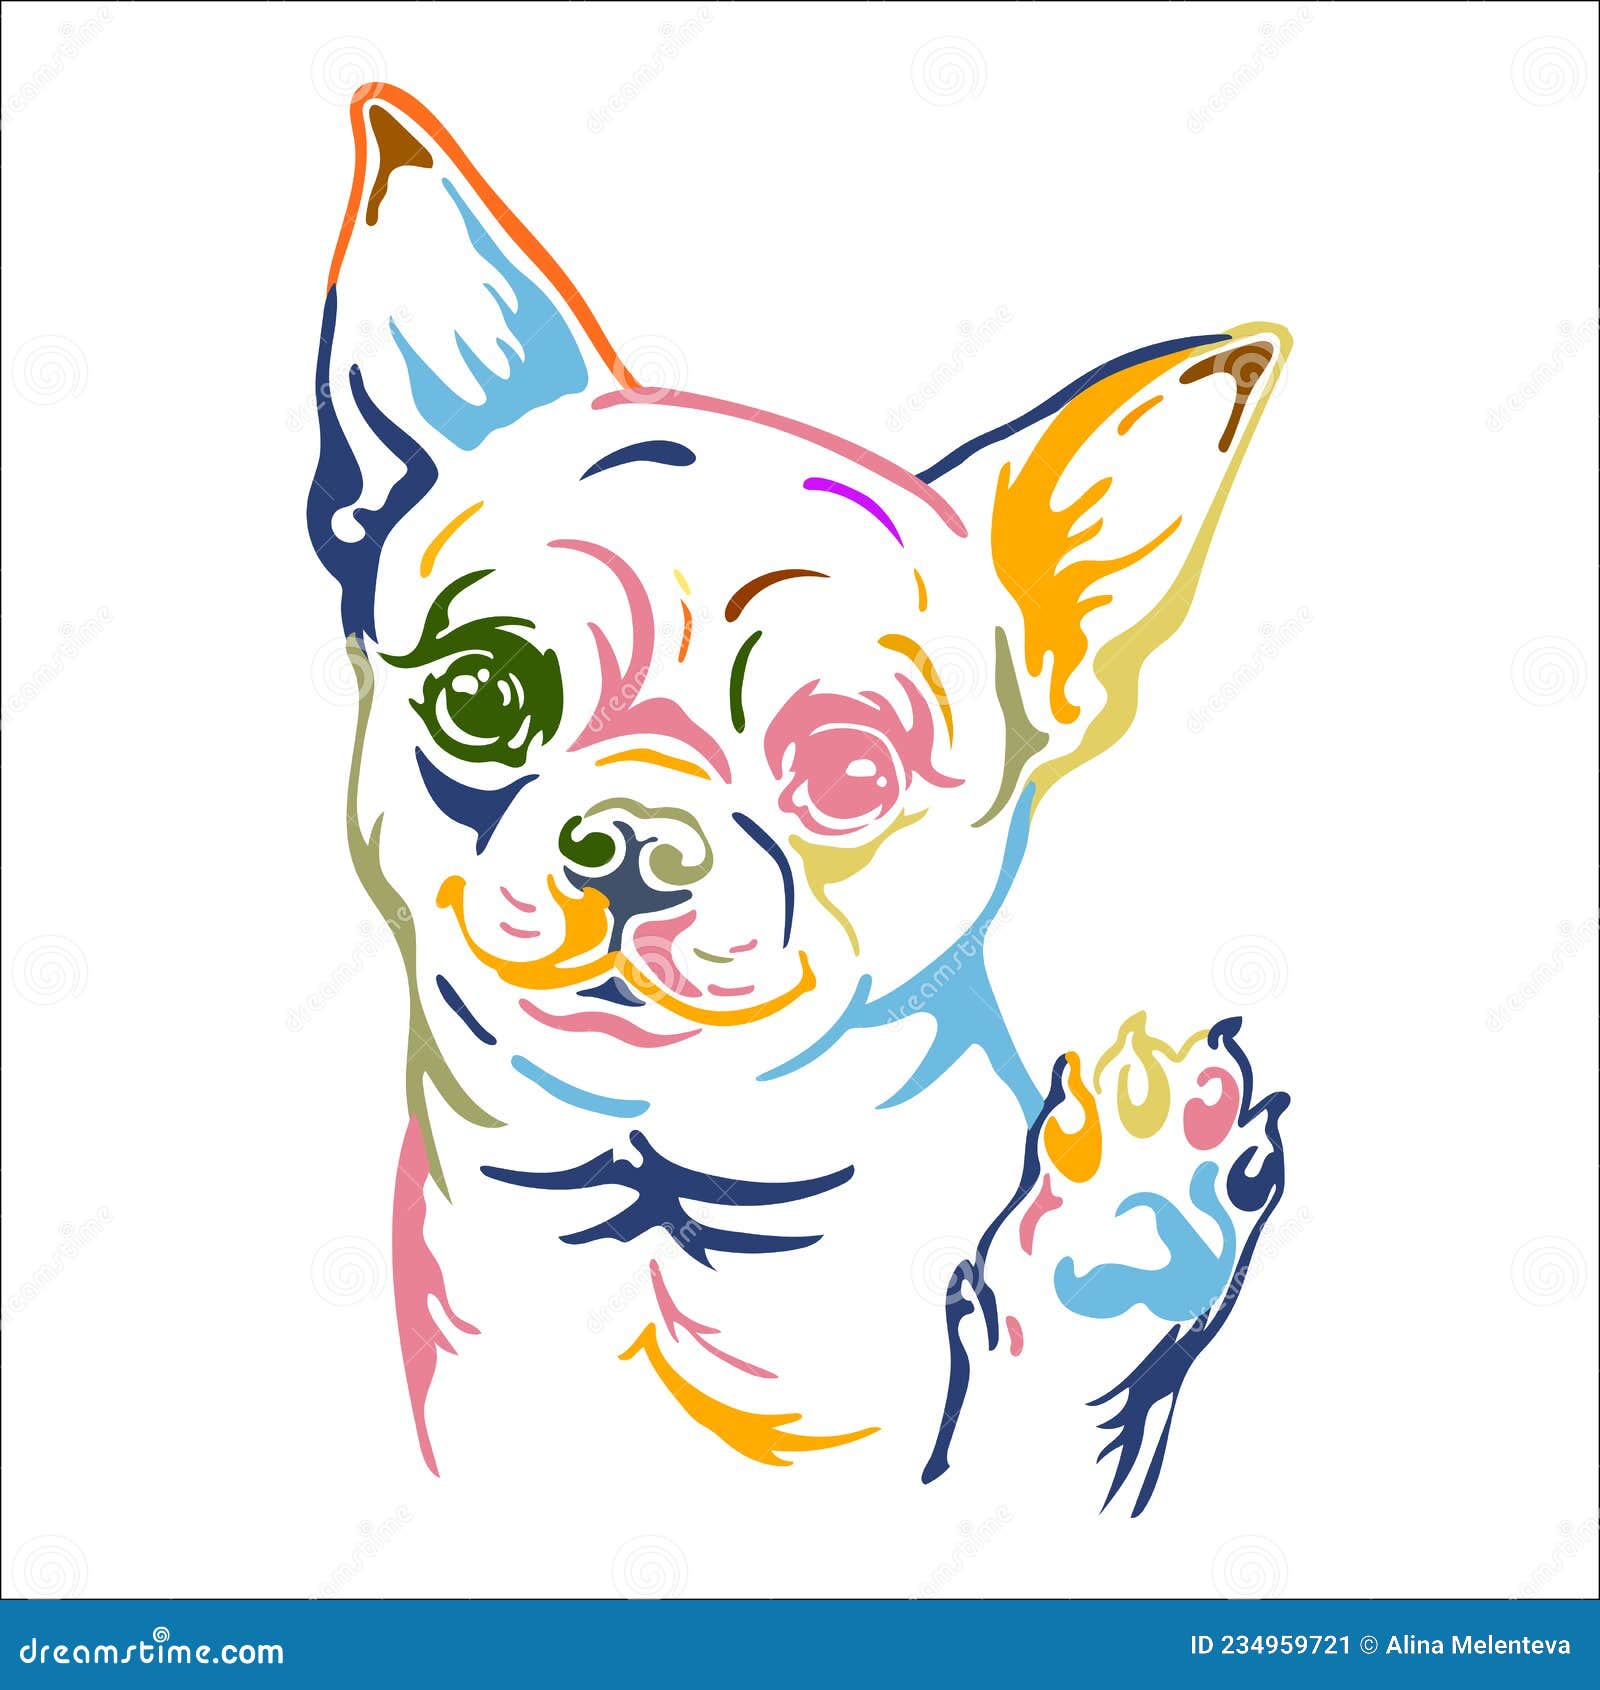 548 Chihuahua Tattoo Images Stock Photos  Vectors  Shutterstock